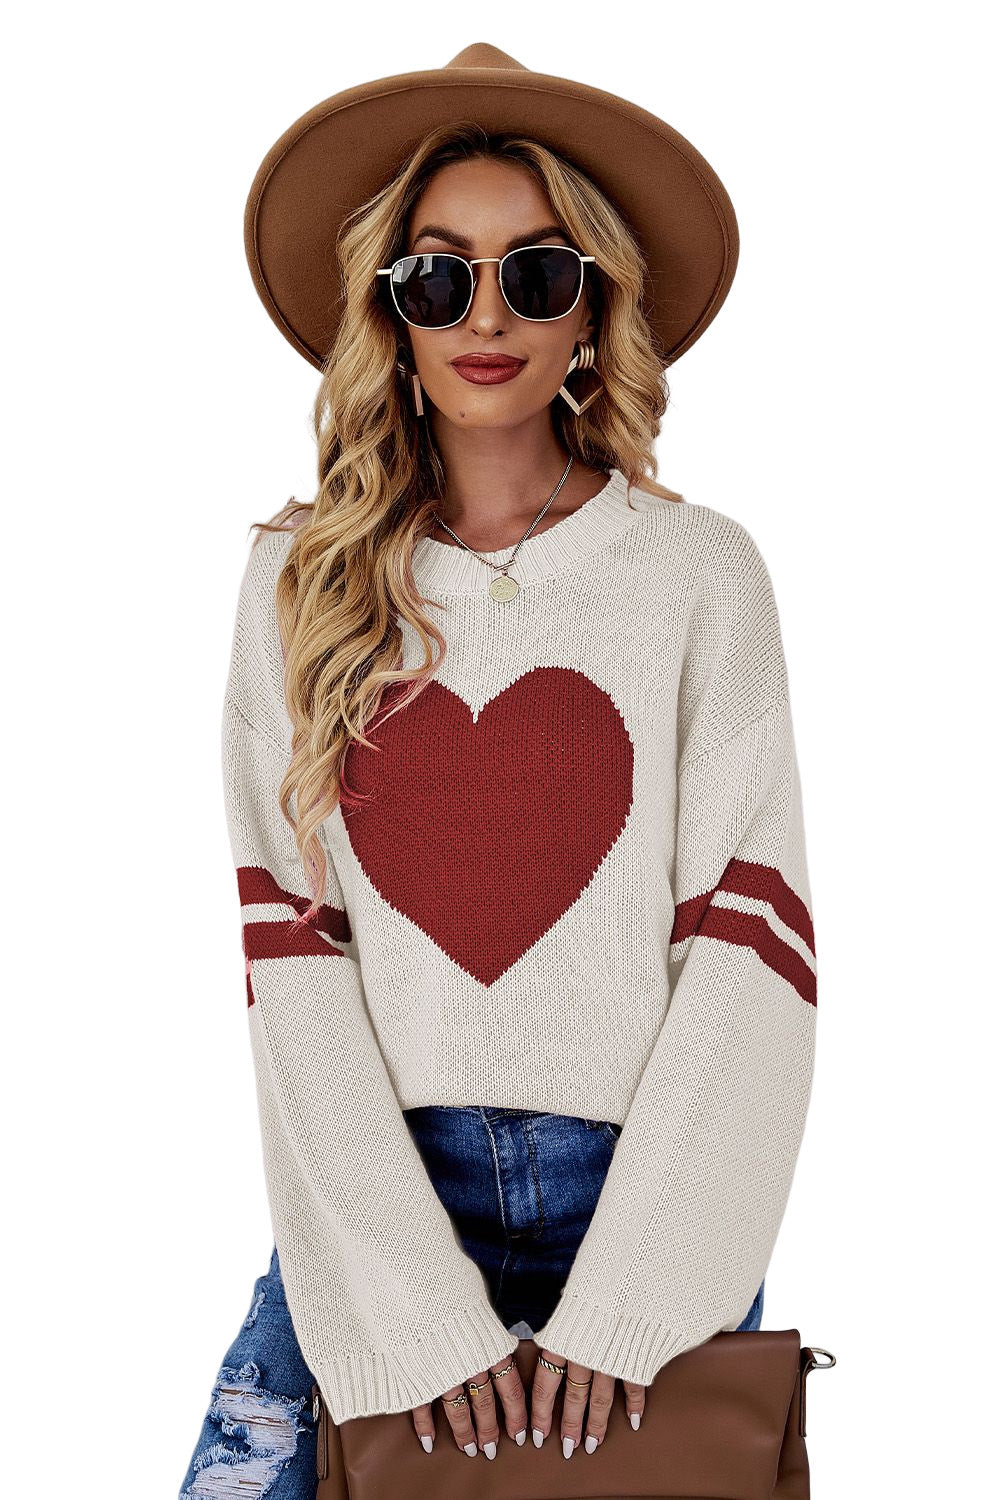 LC2722799-15-S, LC2722799-15-M, LC2722799-15-L, LC2722799-15-XL, Beige Valentine's Day Tops for Women Heart Graphic Wide Sleeves Sweater